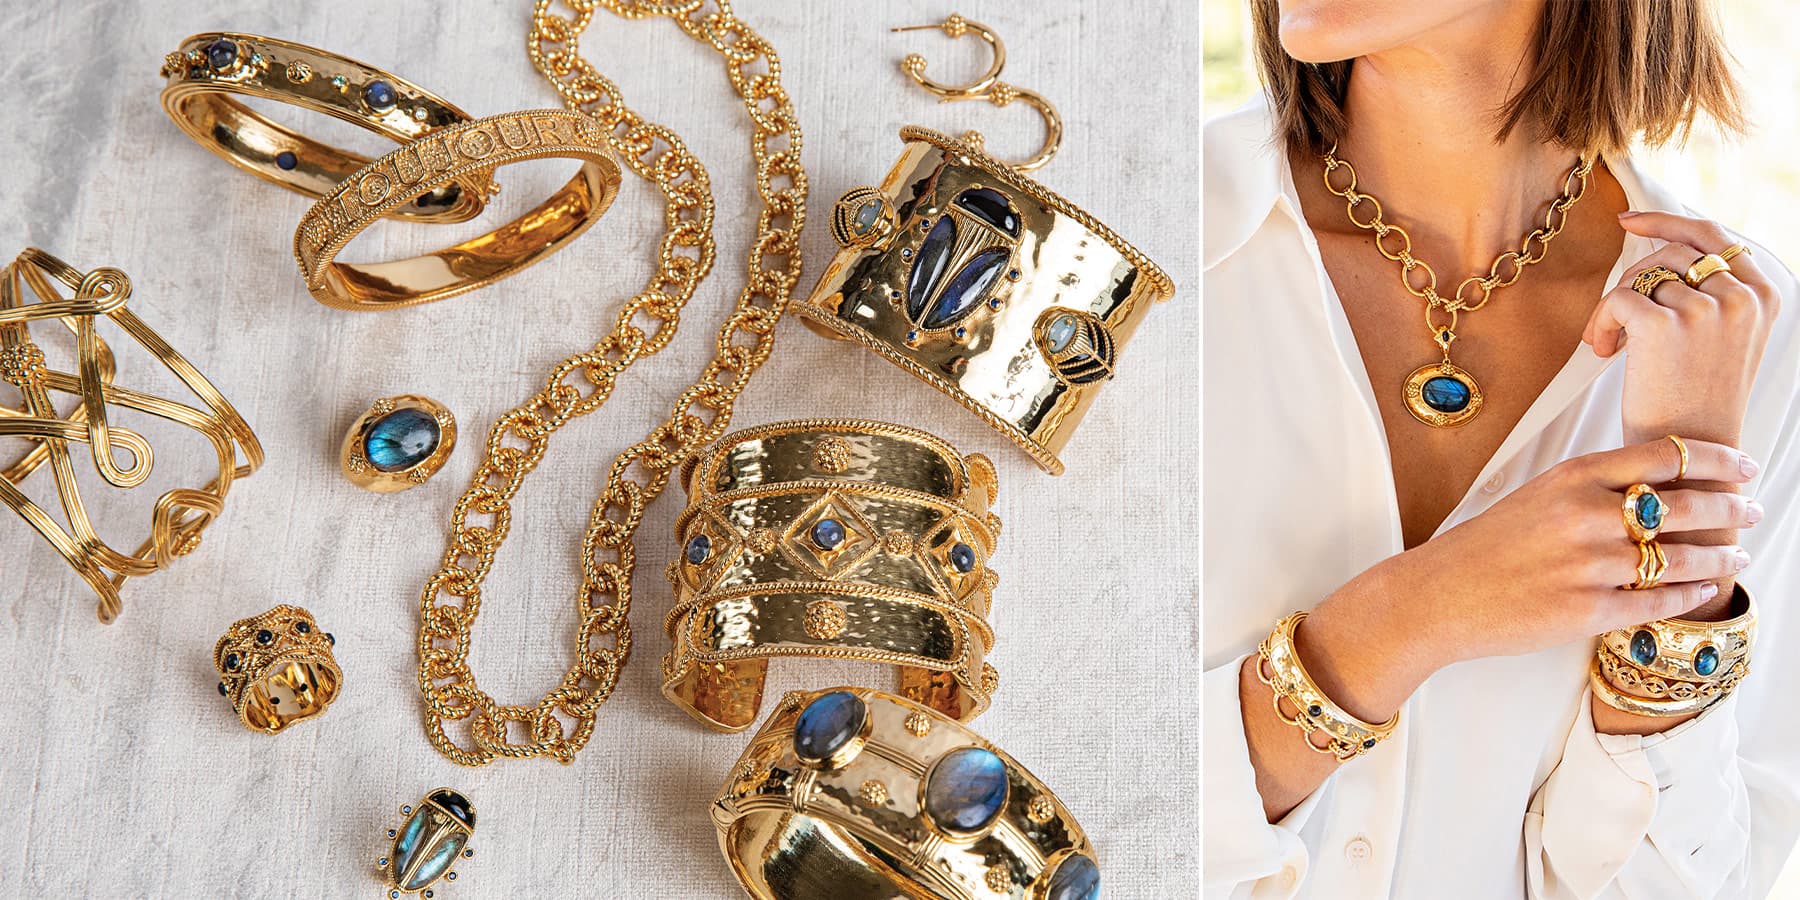 Gold chains, bangles and rings are just some of Capucine De Wulf's jewelry line.